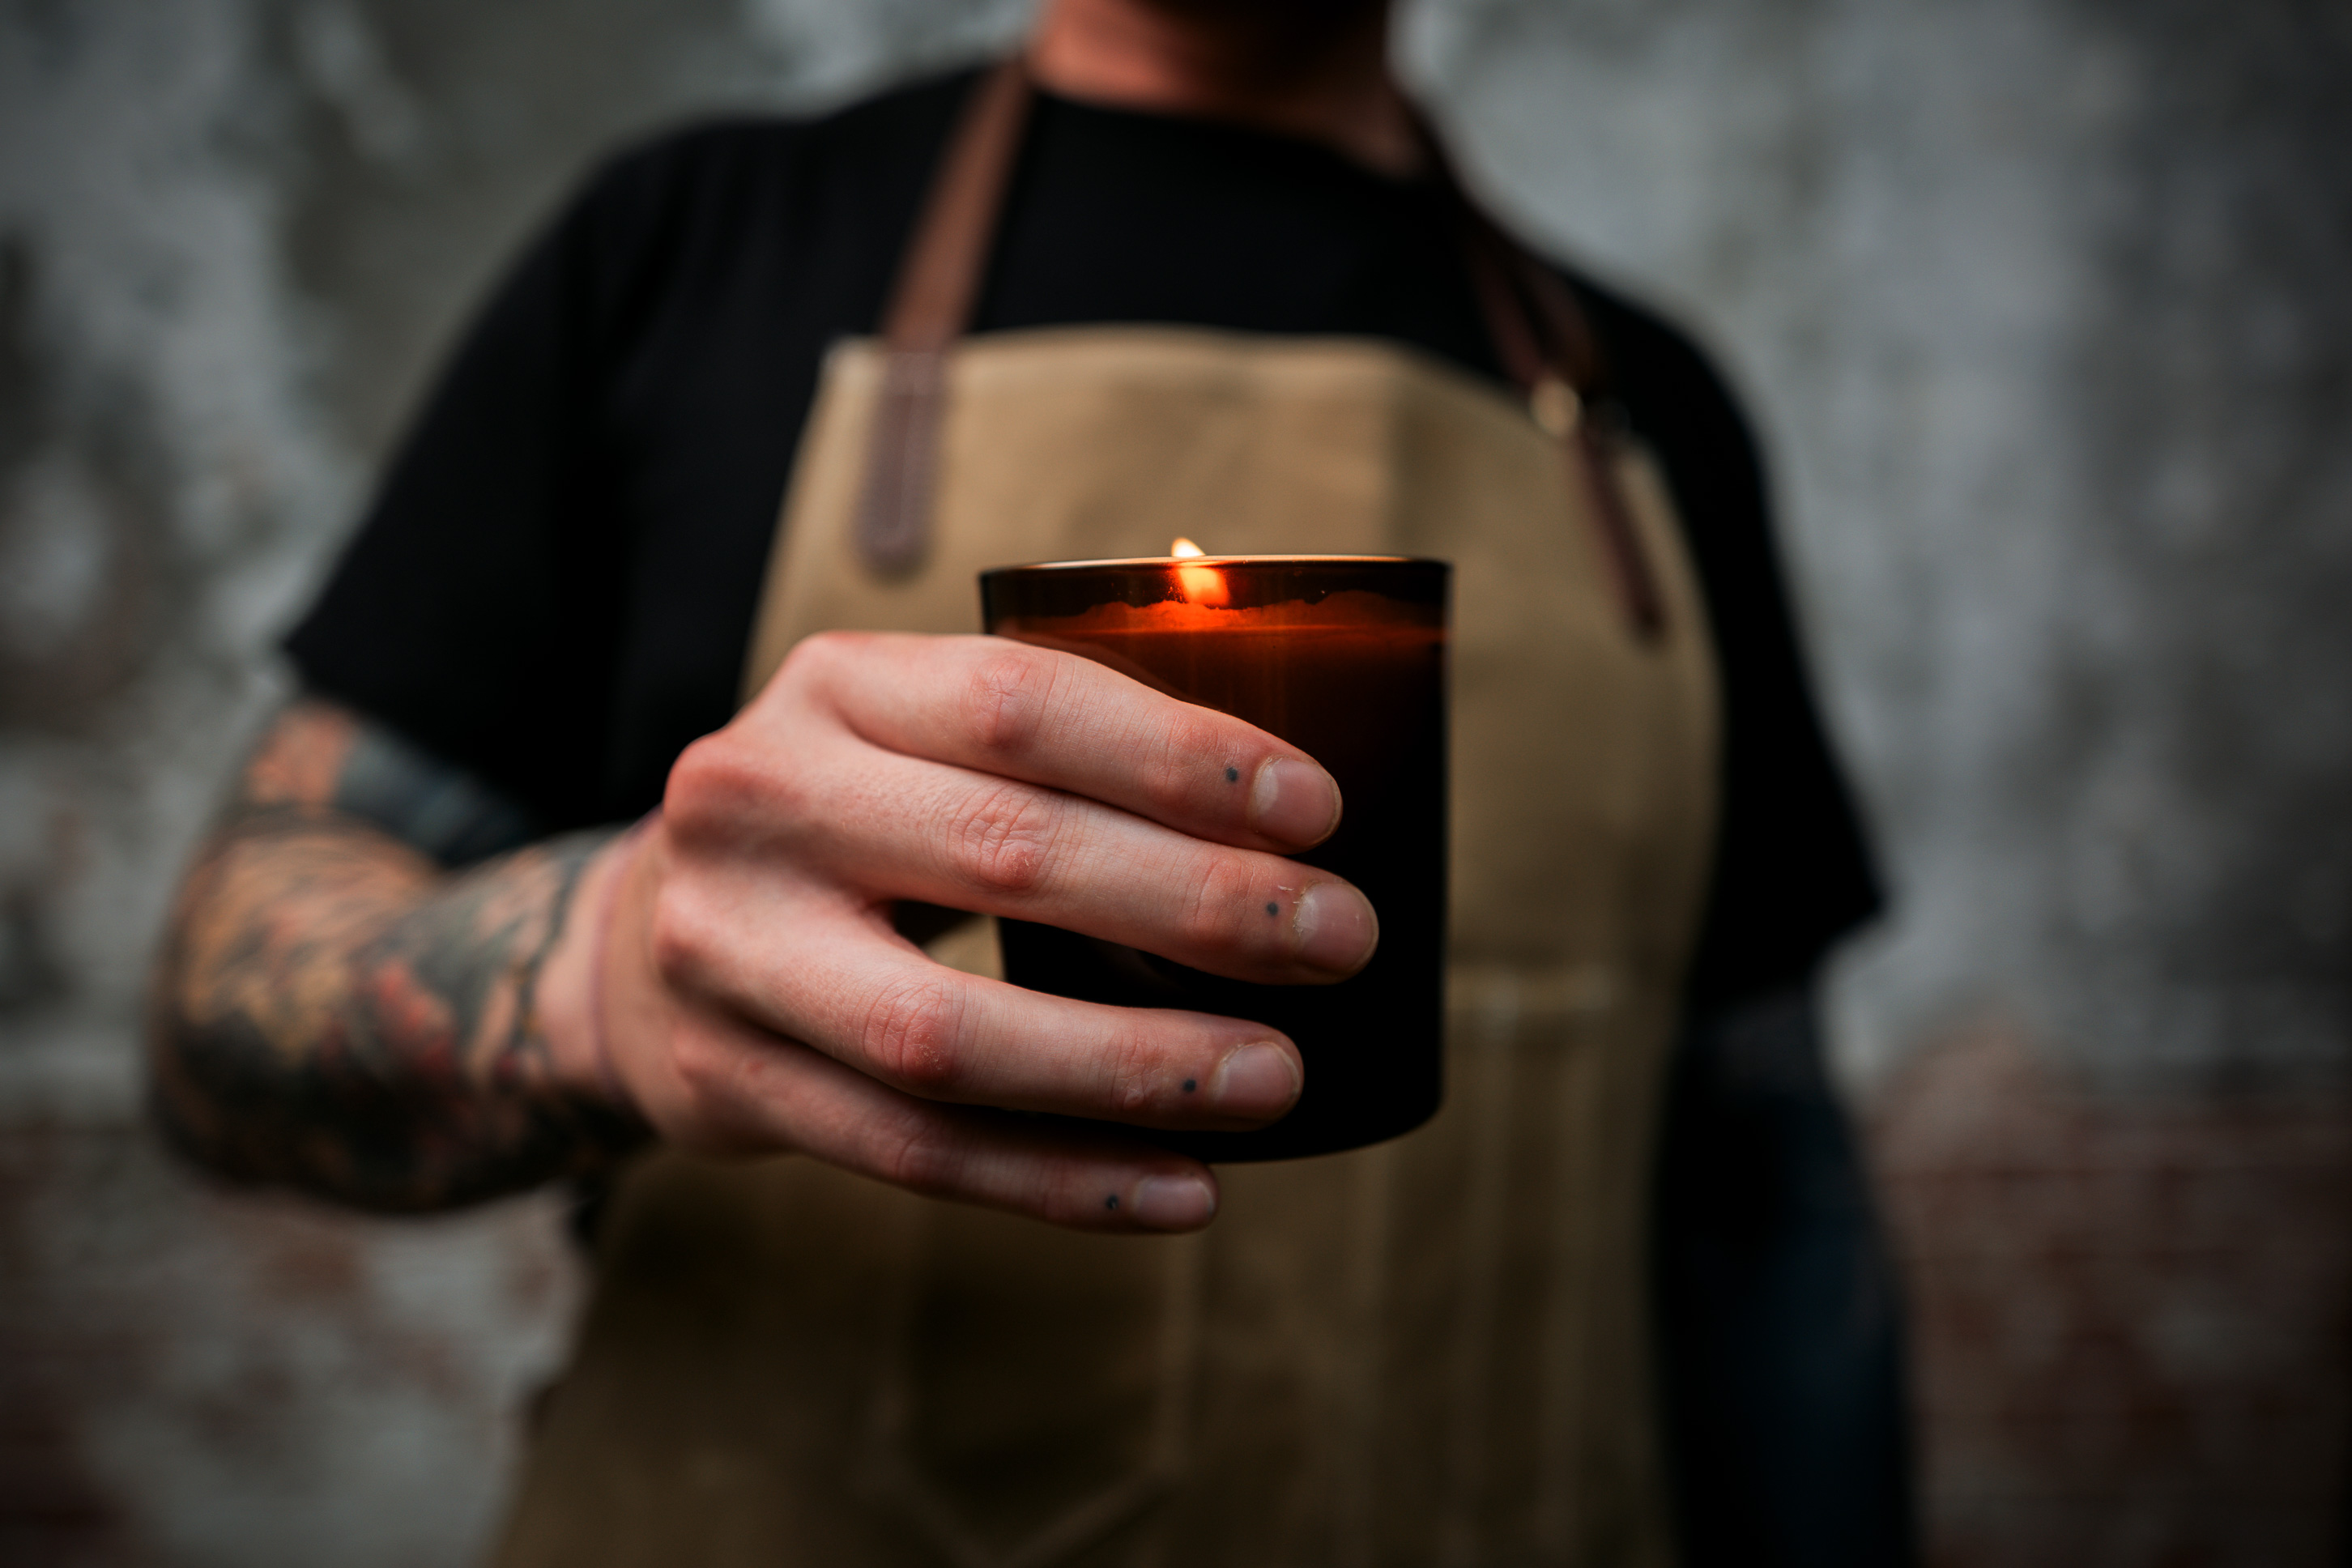 Candle Making course online - taught by professionals